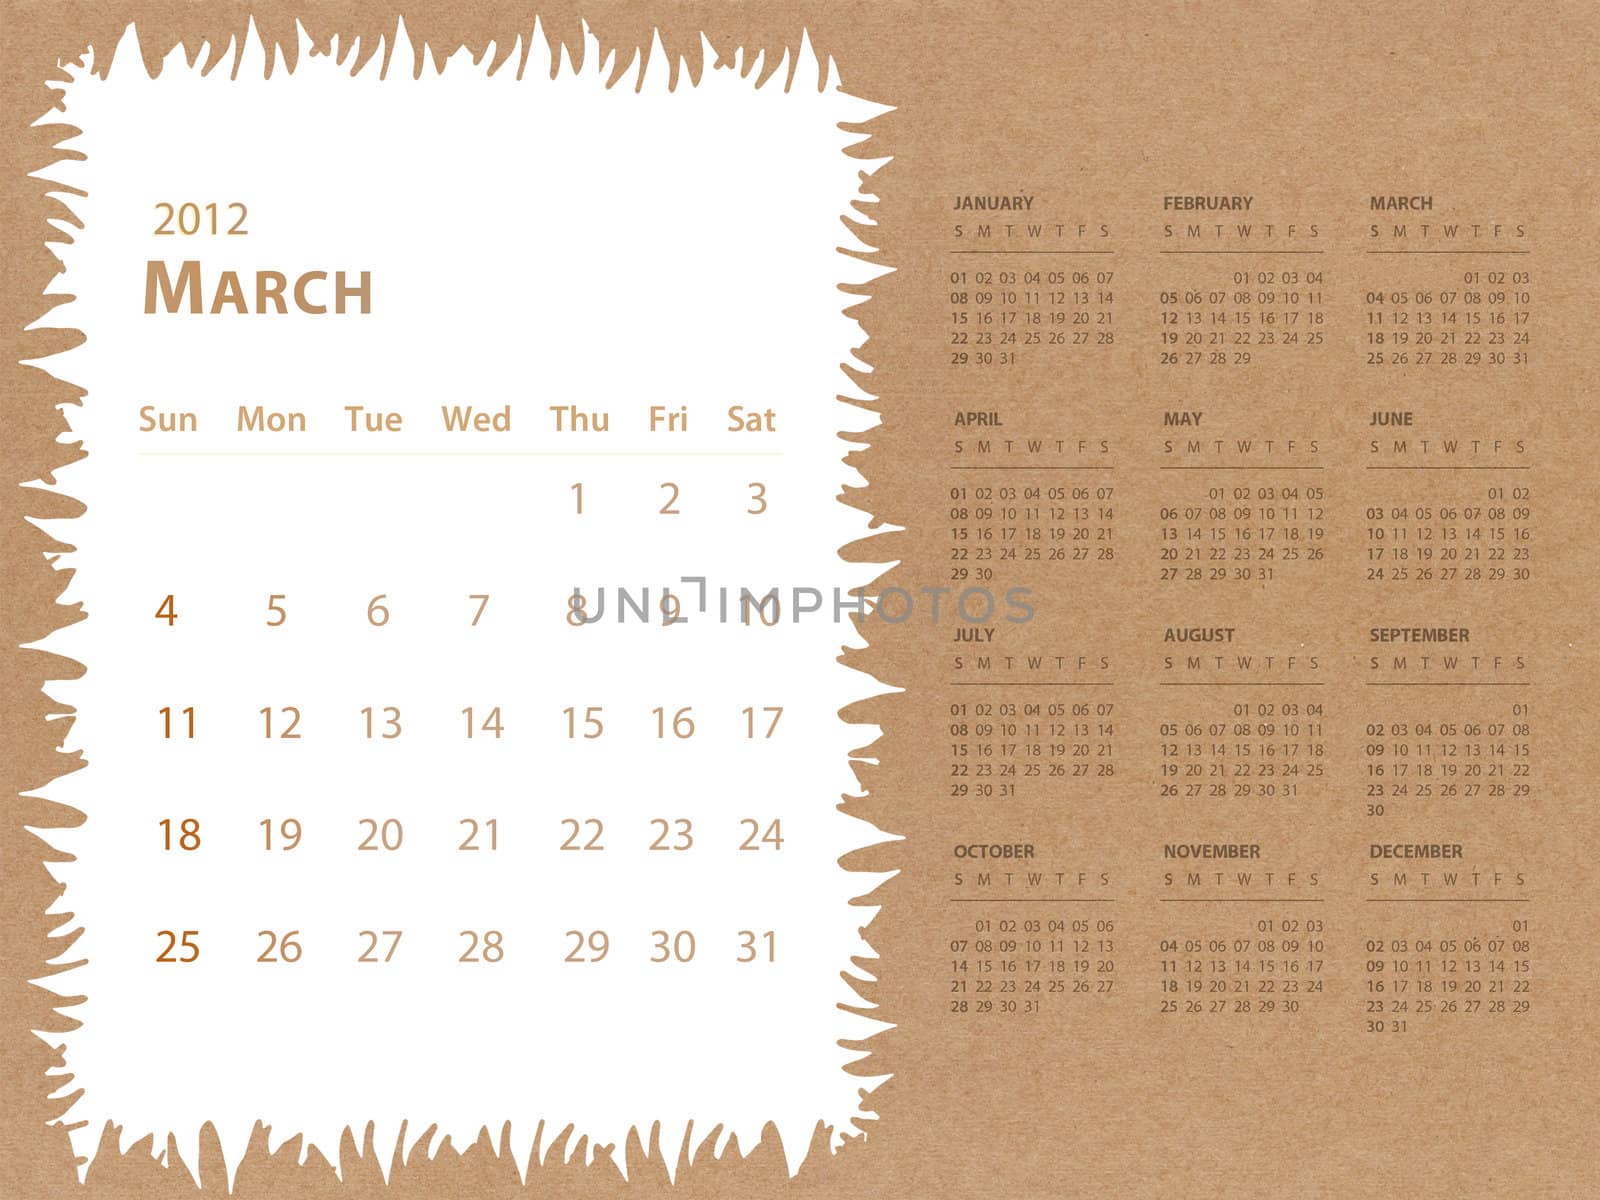 March of 2012 calendar with recycle paper background by jakgree